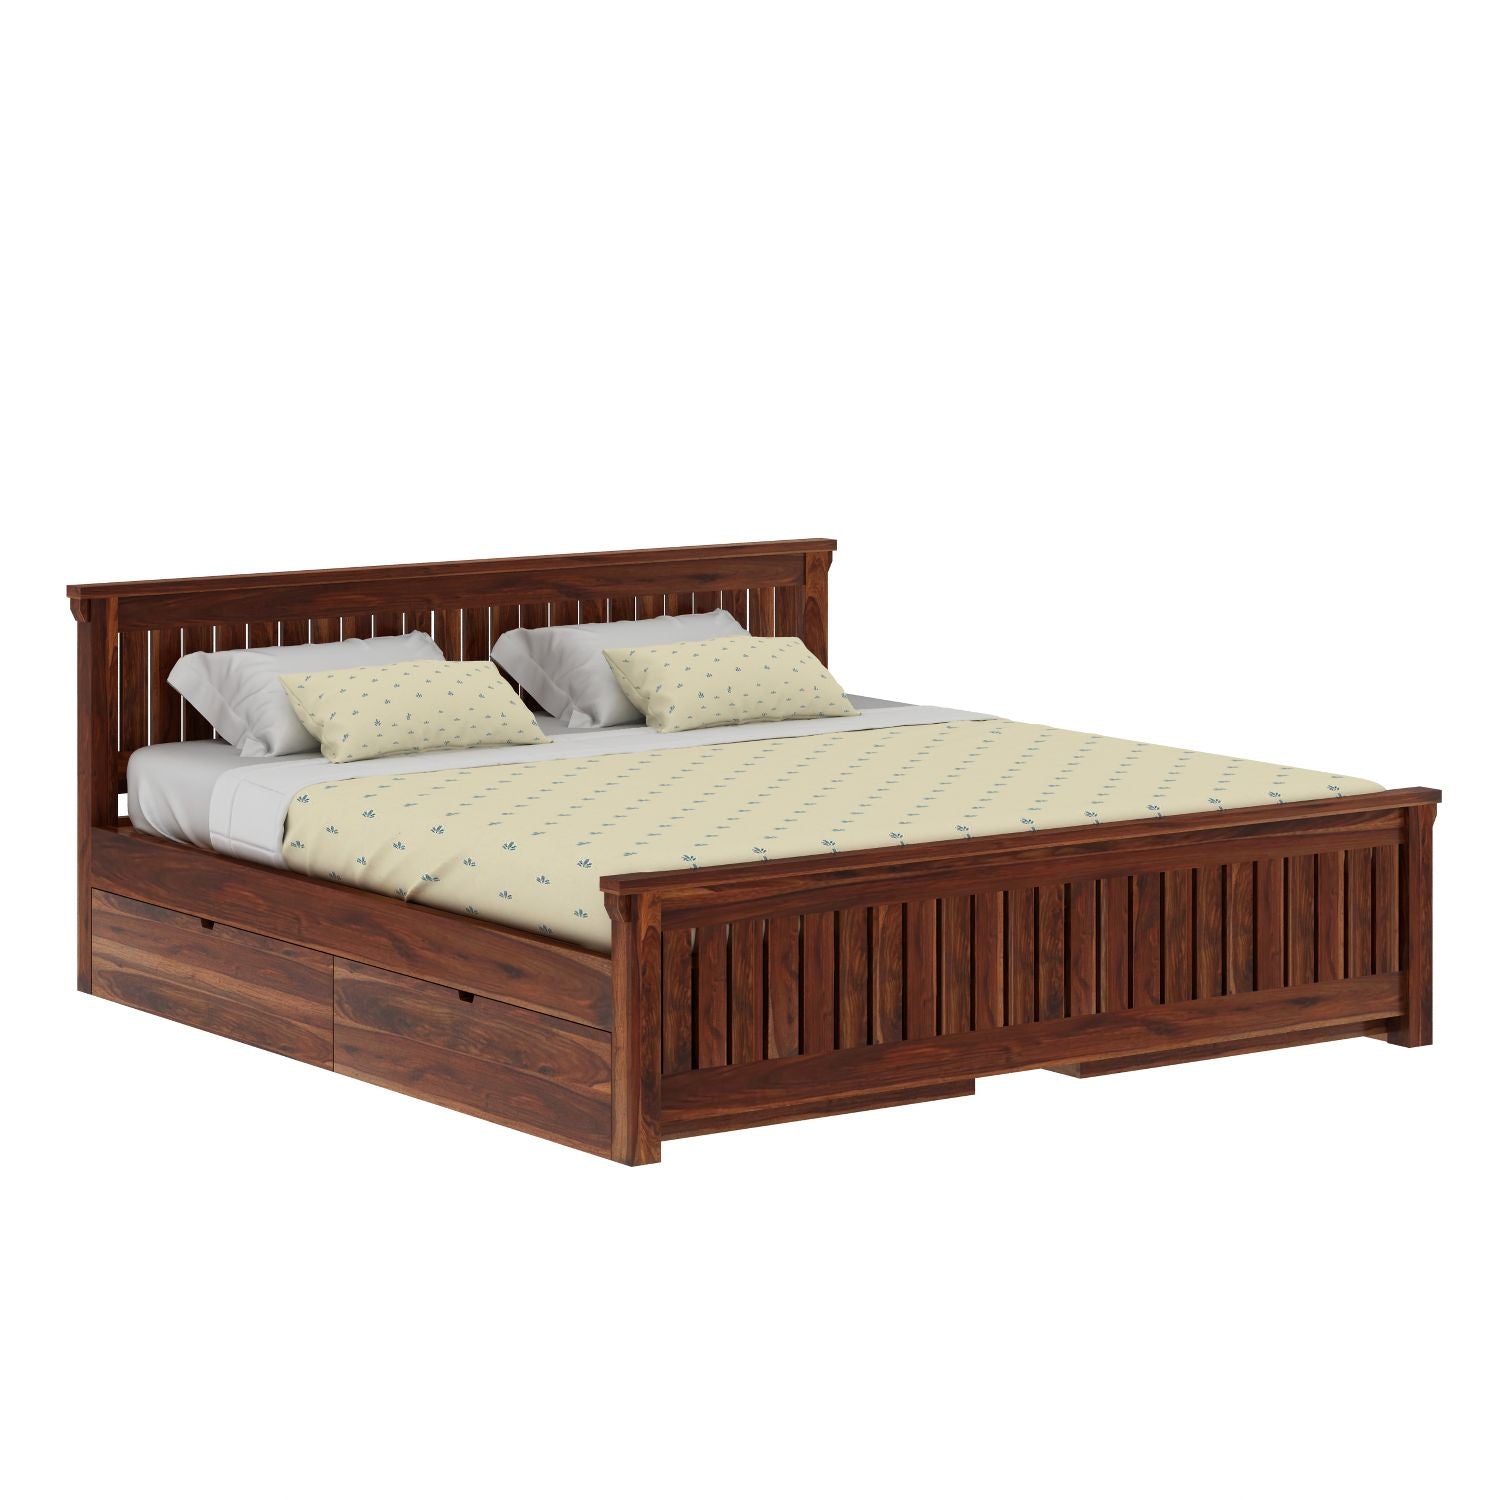 Trinity Solid Sheesham Wood Bed With Four Drawers (King Size, Natural Finish)